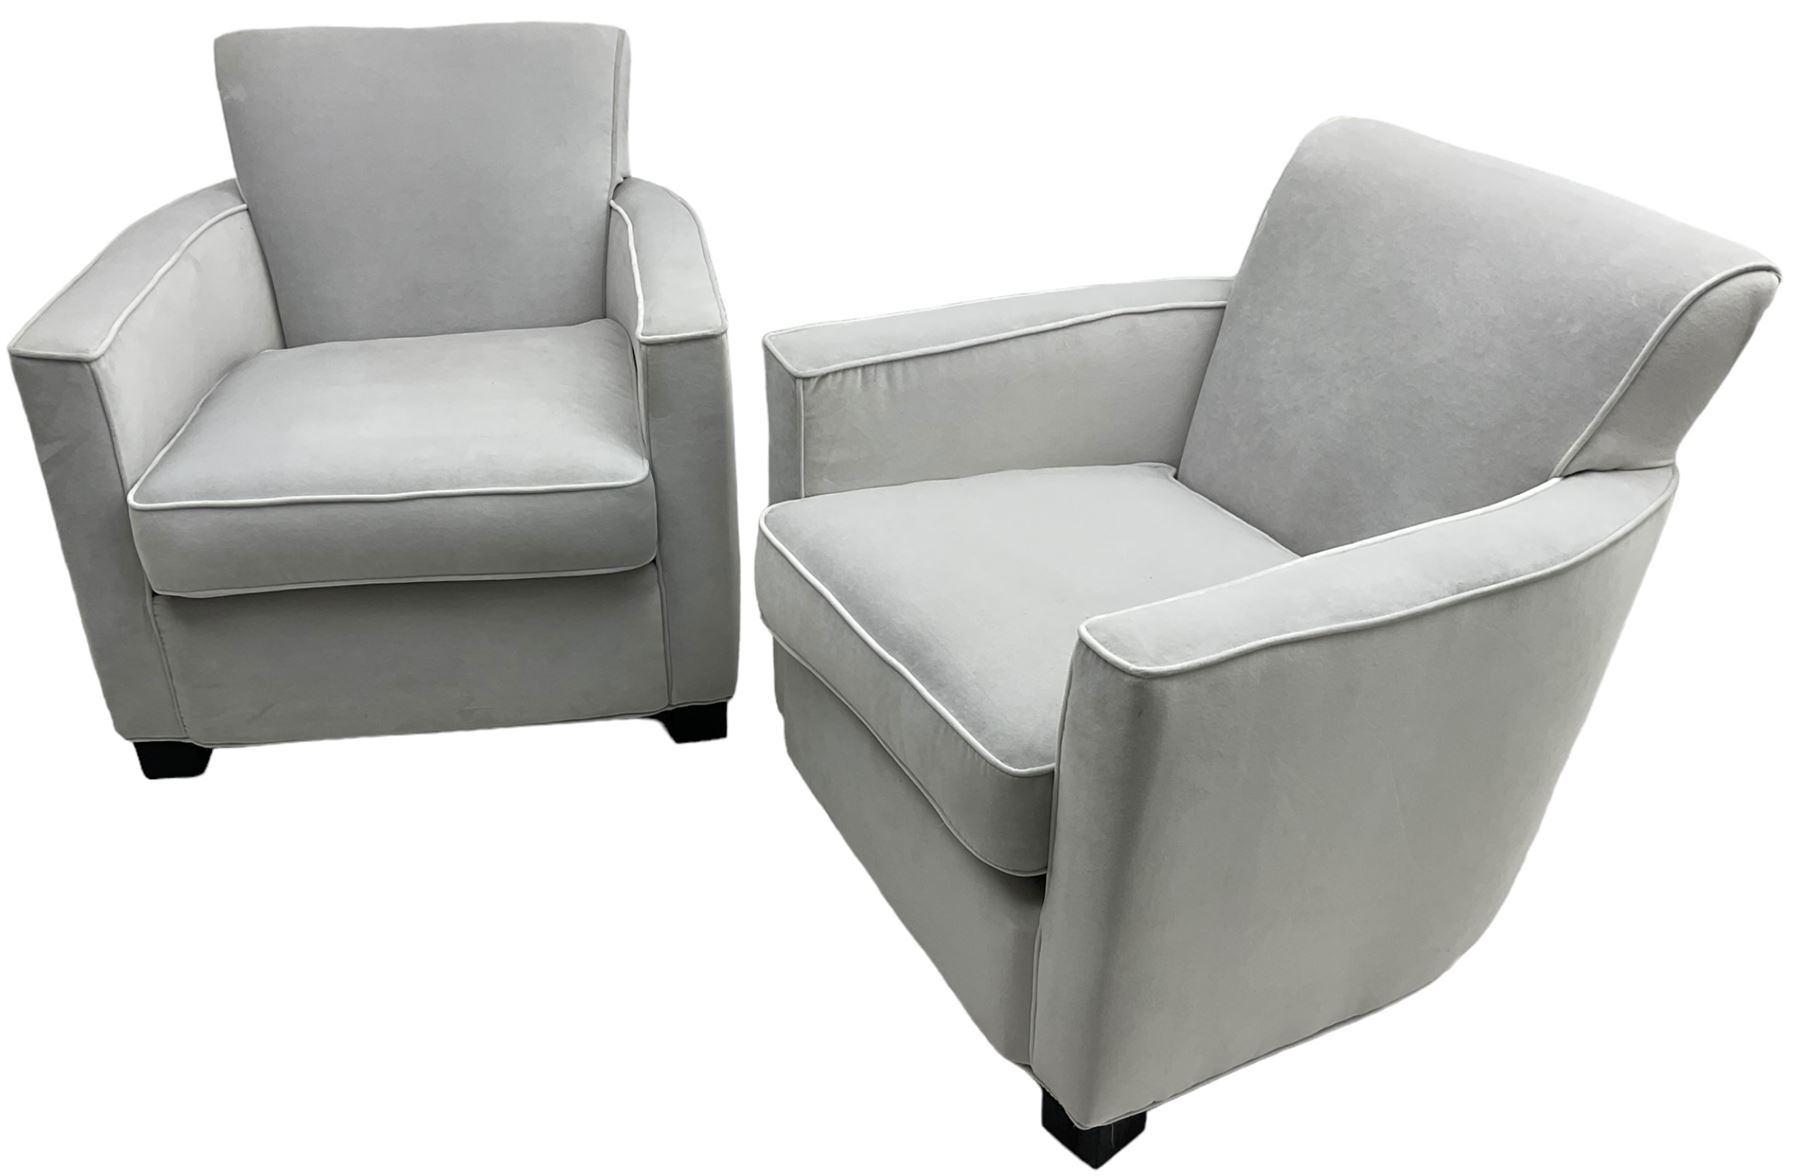 India Jane Interiors - 'Savoy' pair of contemporary armchairs upholstered in light grey velvet fabri - Image 5 of 7